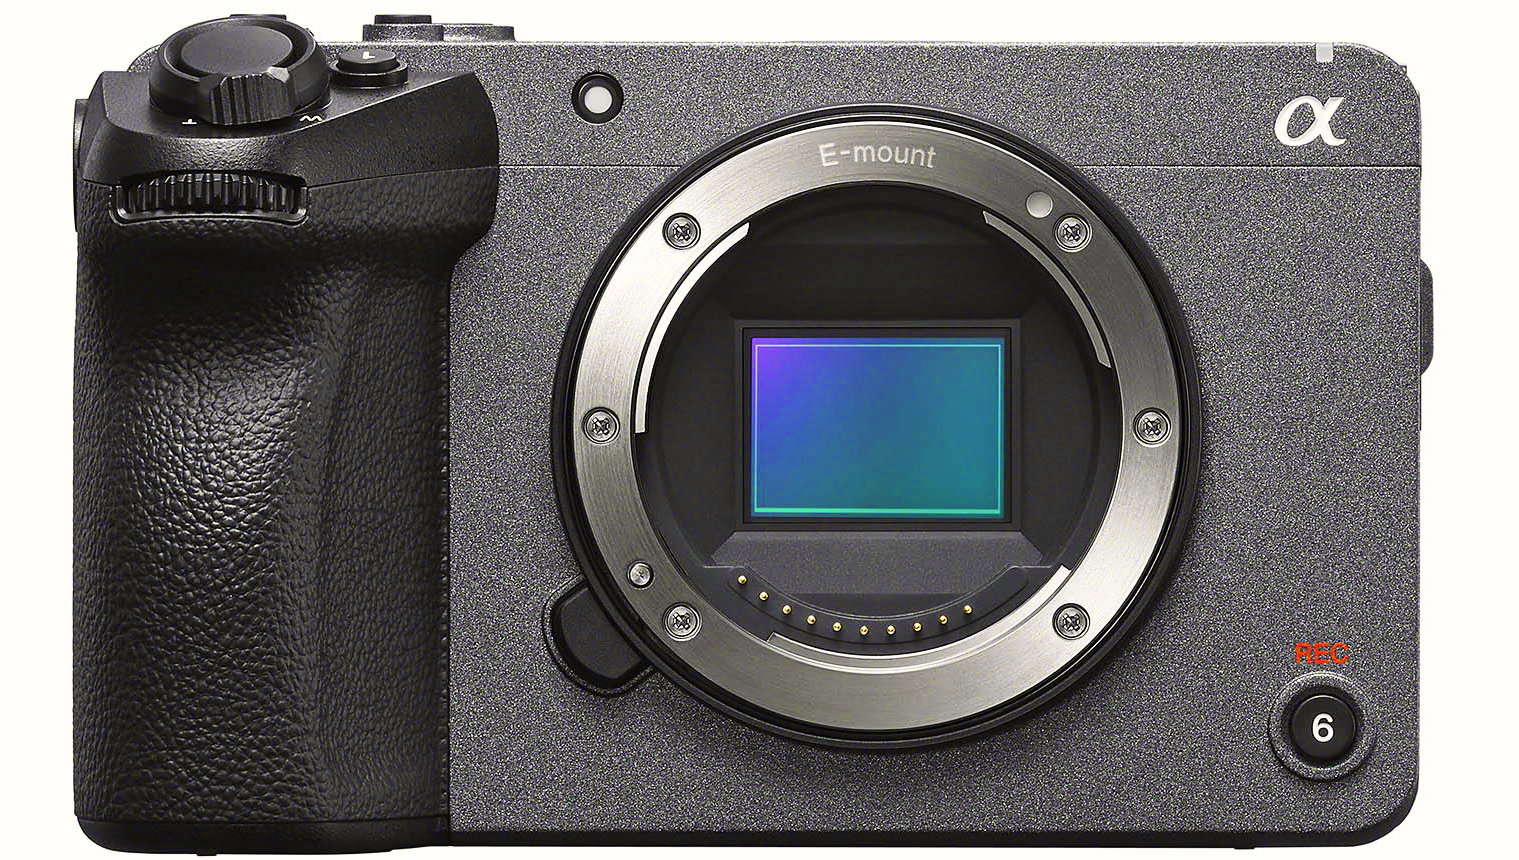 Beware of Sony's new firmware update for ILME-FX3 and FX30